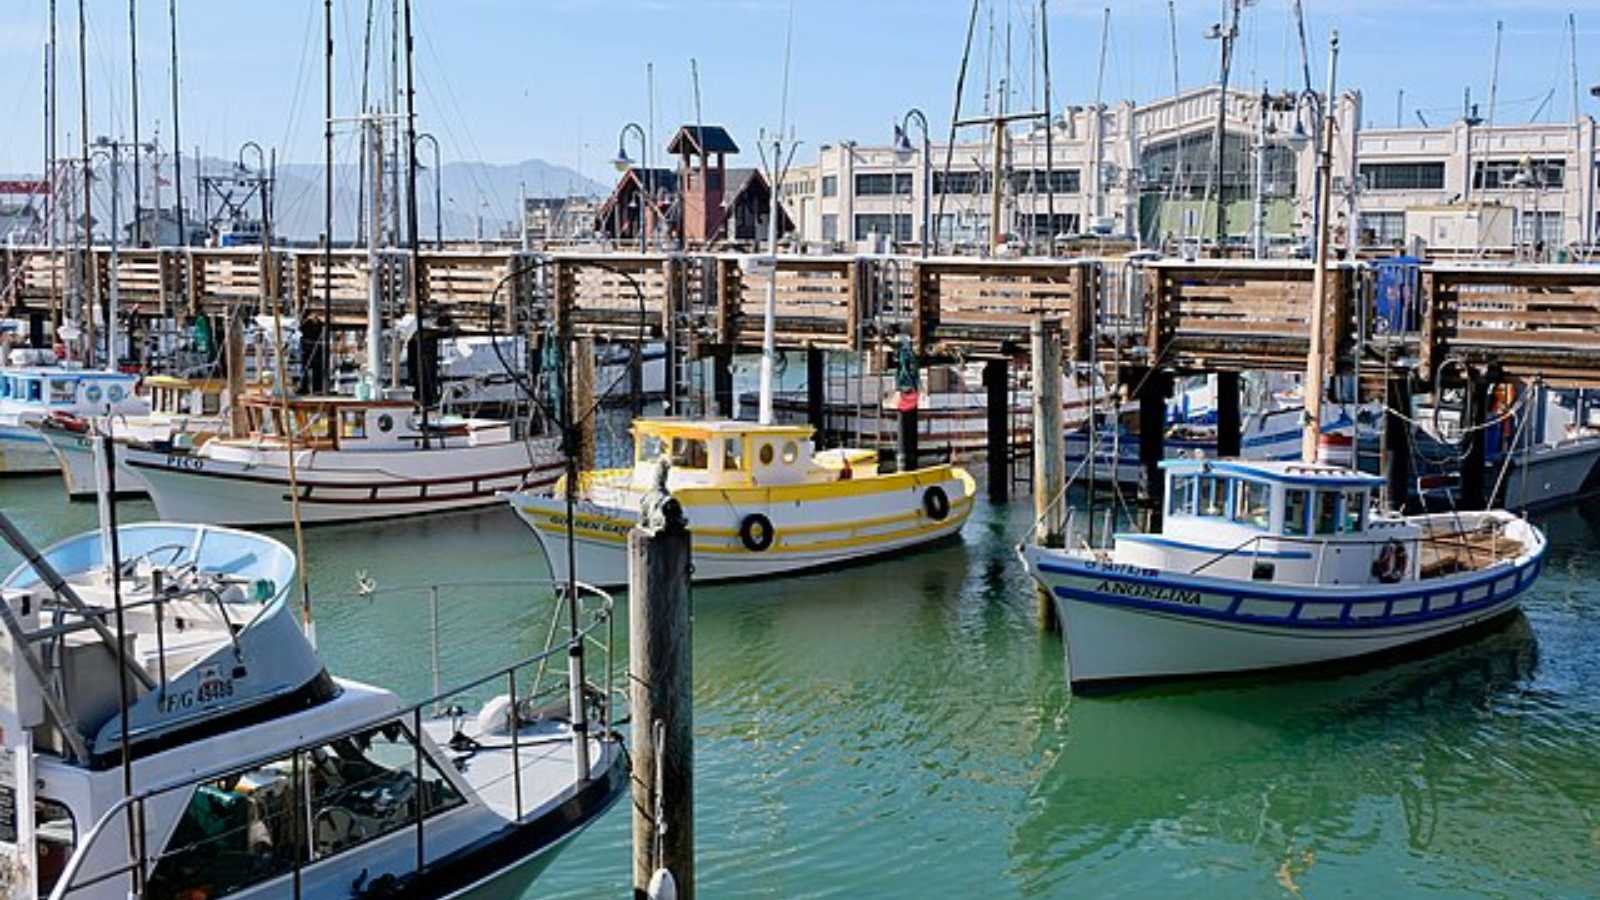 <p><span>Overcrowded and lacking authentic local culture, Fisherman's Wharf is where tourist traps are born. It's great if you like souvenir shops and wax museums, but not much else.</span></p>